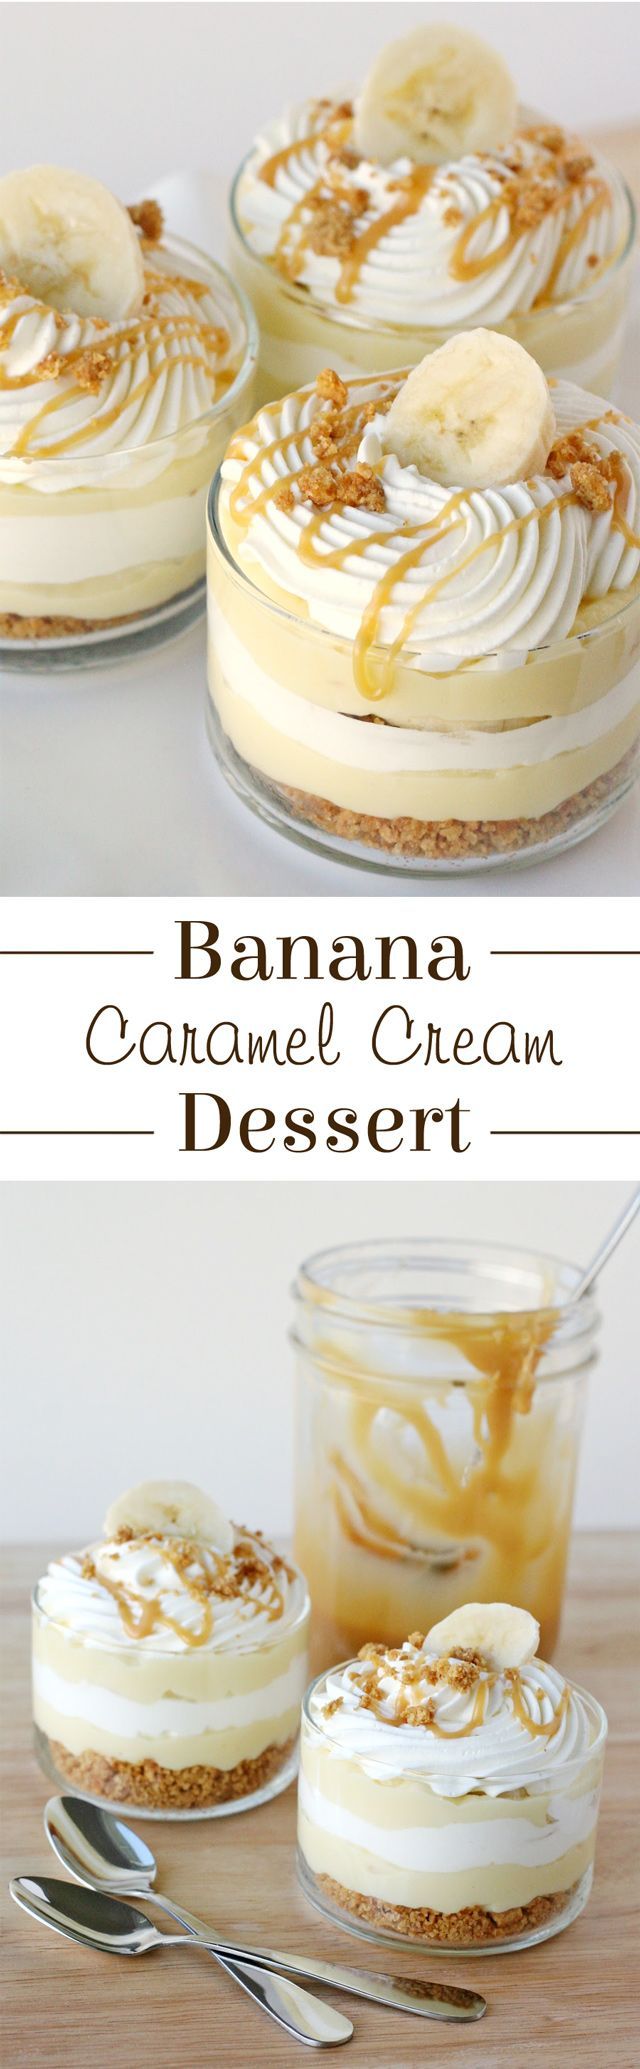 This Banana Caramel Cream Dessert is simply one of the most delicious desserts ever! Sweet, creamy, crunchy… this dessert has it